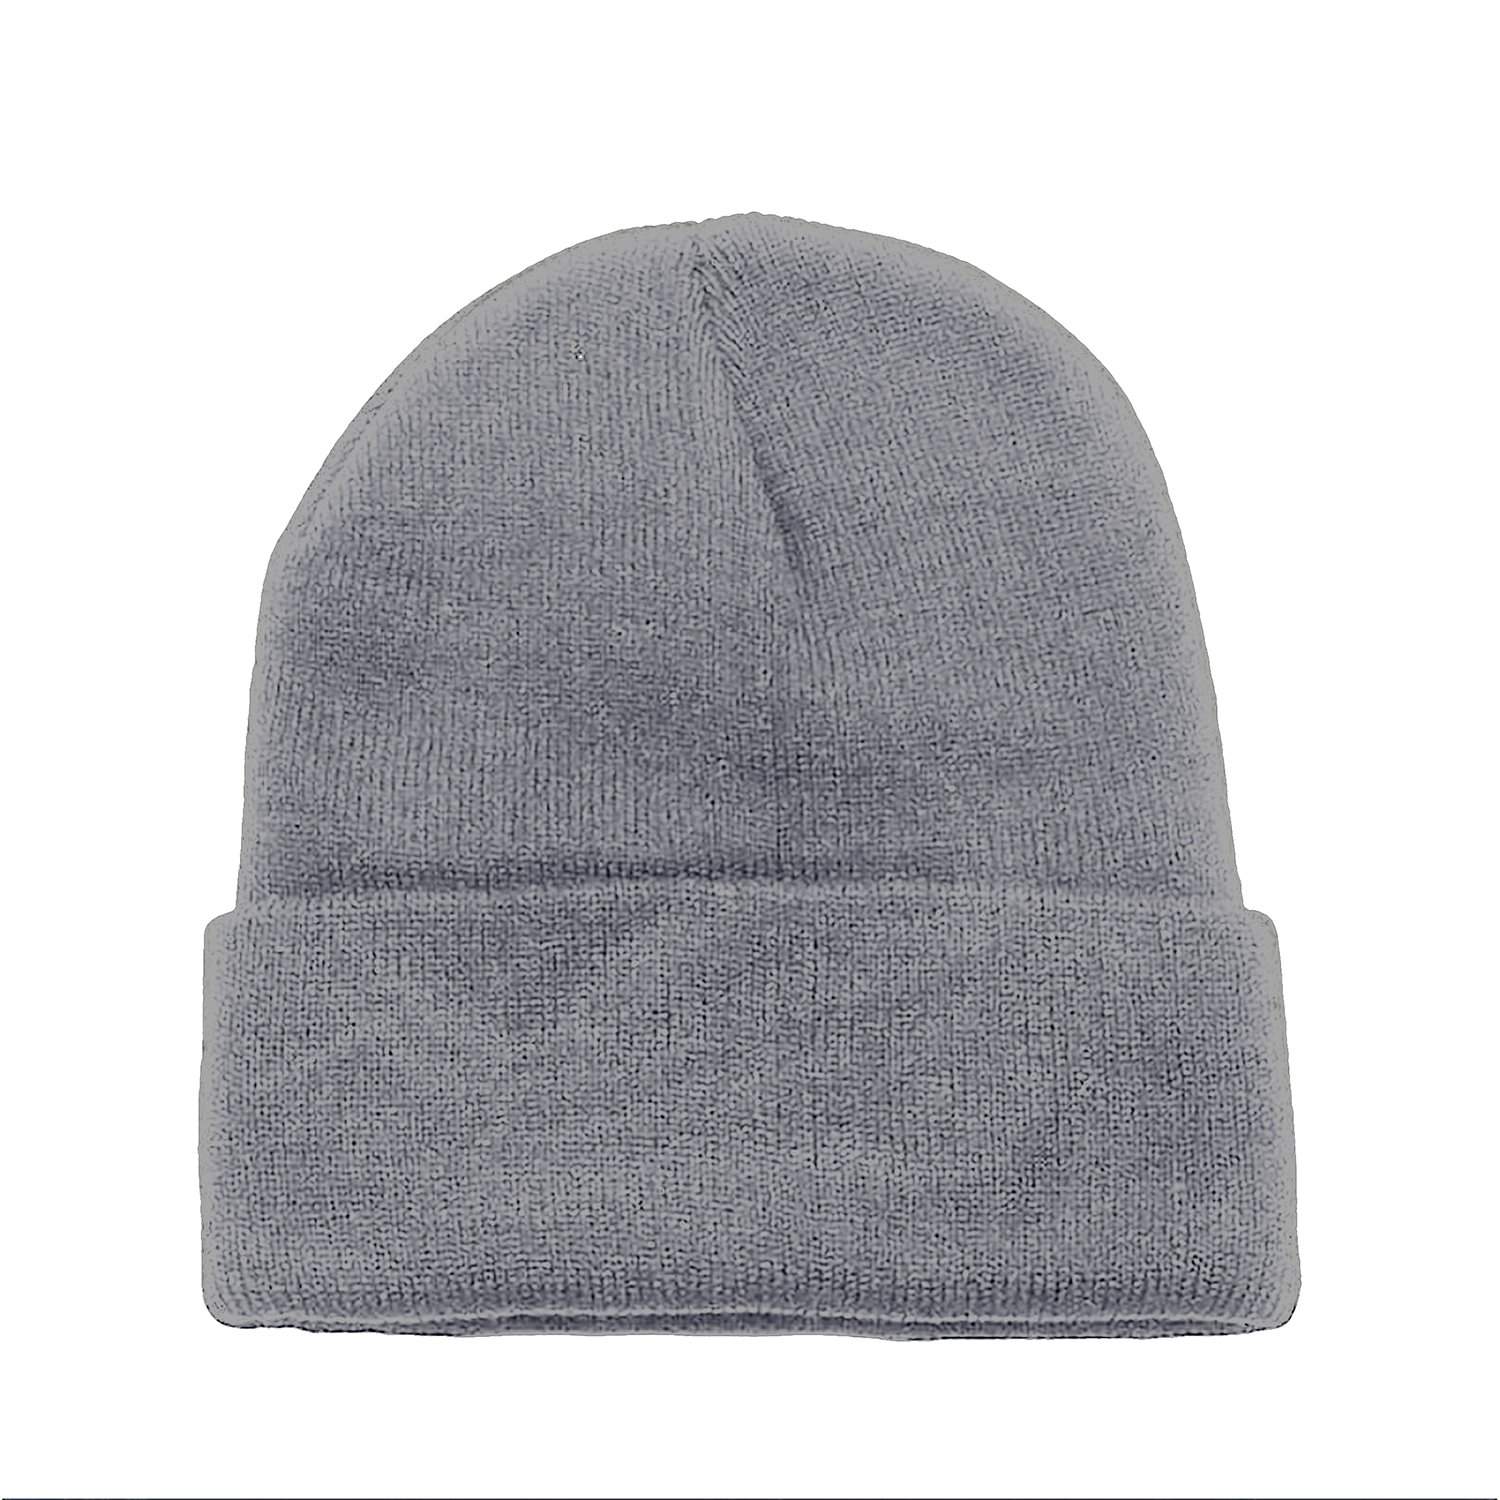 Solid Long Cuffed Beanie Skullies for Men and Women